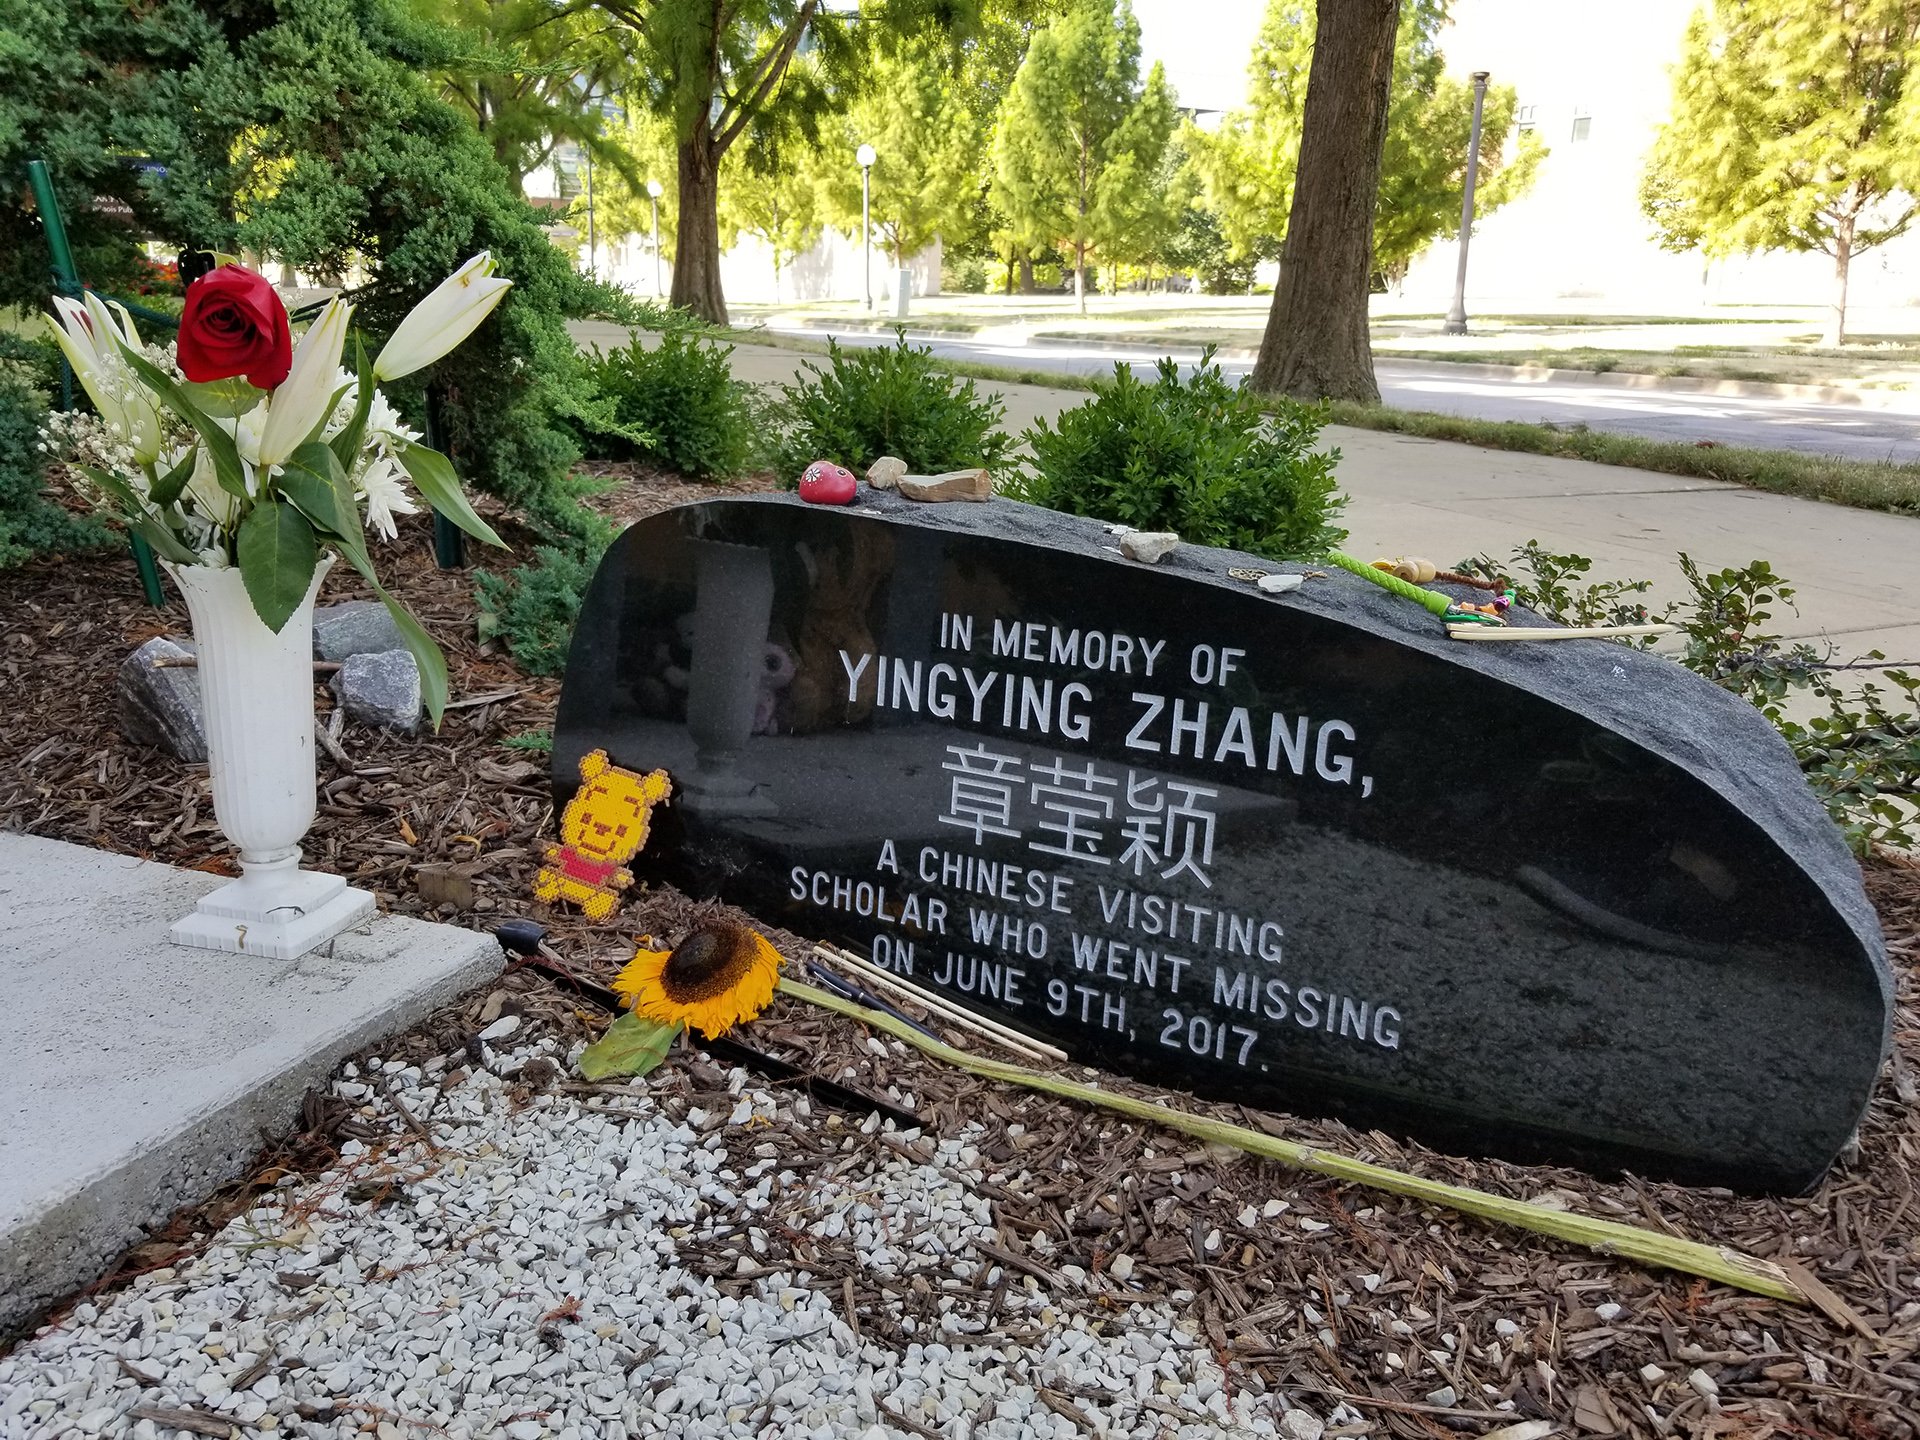 A memorial stone engraved with Yingying Zhang’s name in both English and Chinese on the campus of the University of Illinois at Urbana-Champaign on Aug. 7, 2019.  (Matt Masterson / WTTW News)